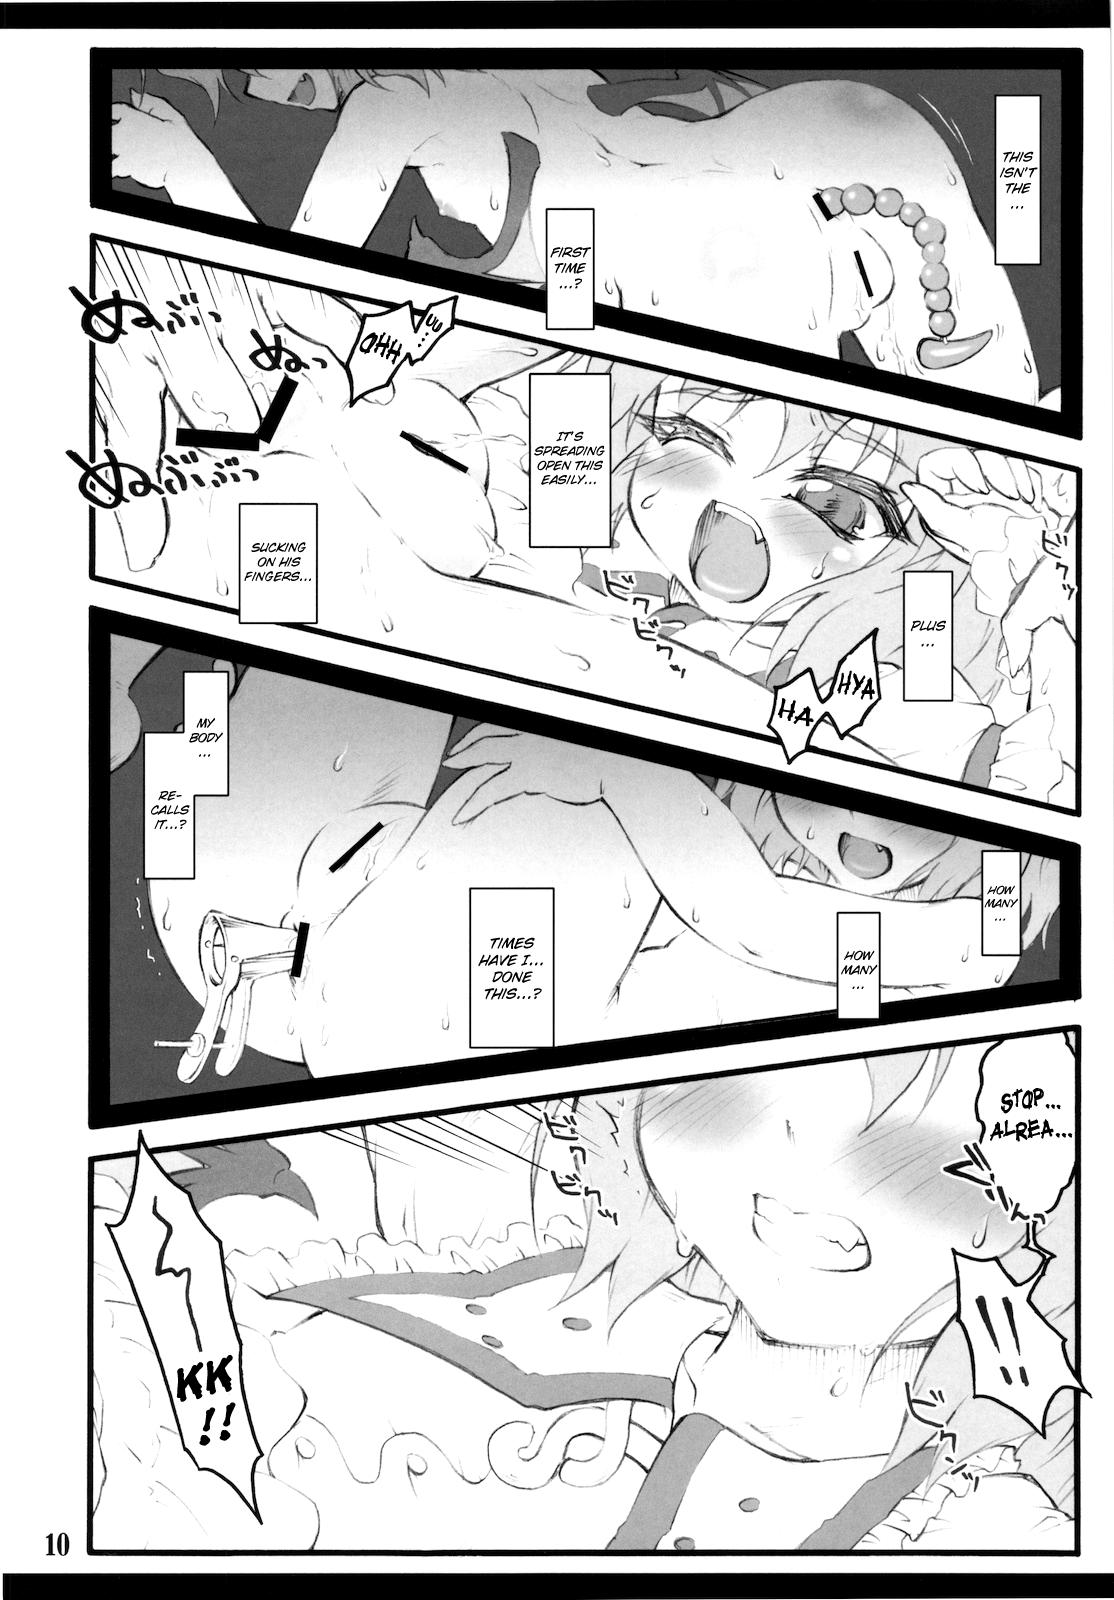 Leaked Remilia - Touhou project Prostitute - Page 10